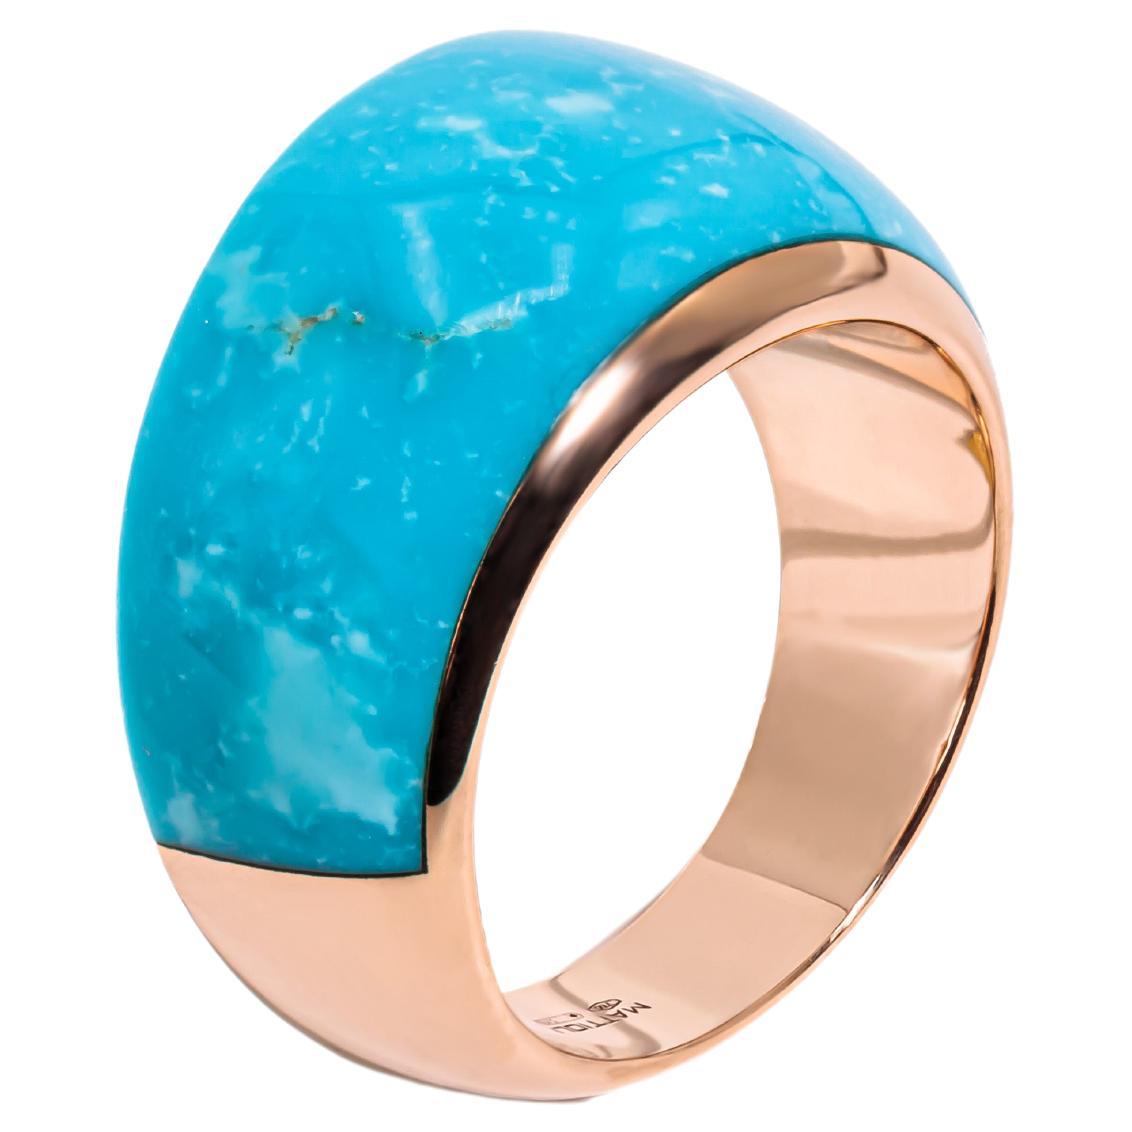 Mattioli Eve_r Collection New Ring in Rose Gold & Turquoise For Sale